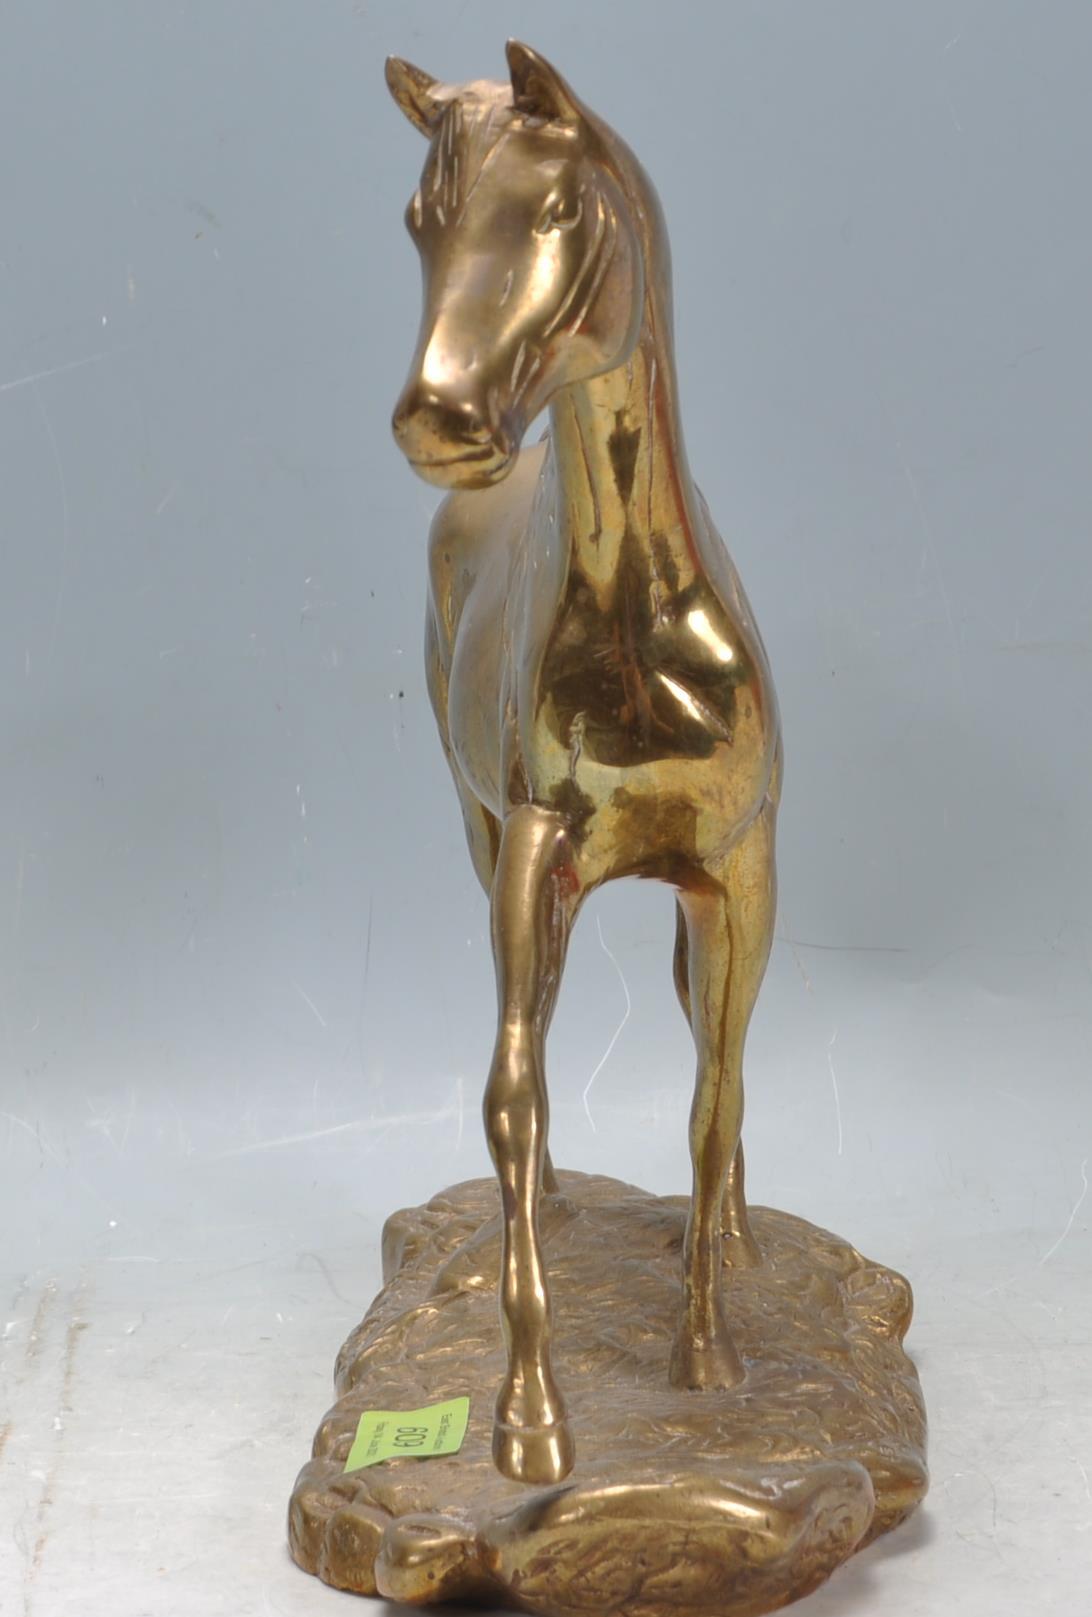 VINTAGE 20TH CENTURY BRASS HORSE ORNAMENT - Image 4 of 6